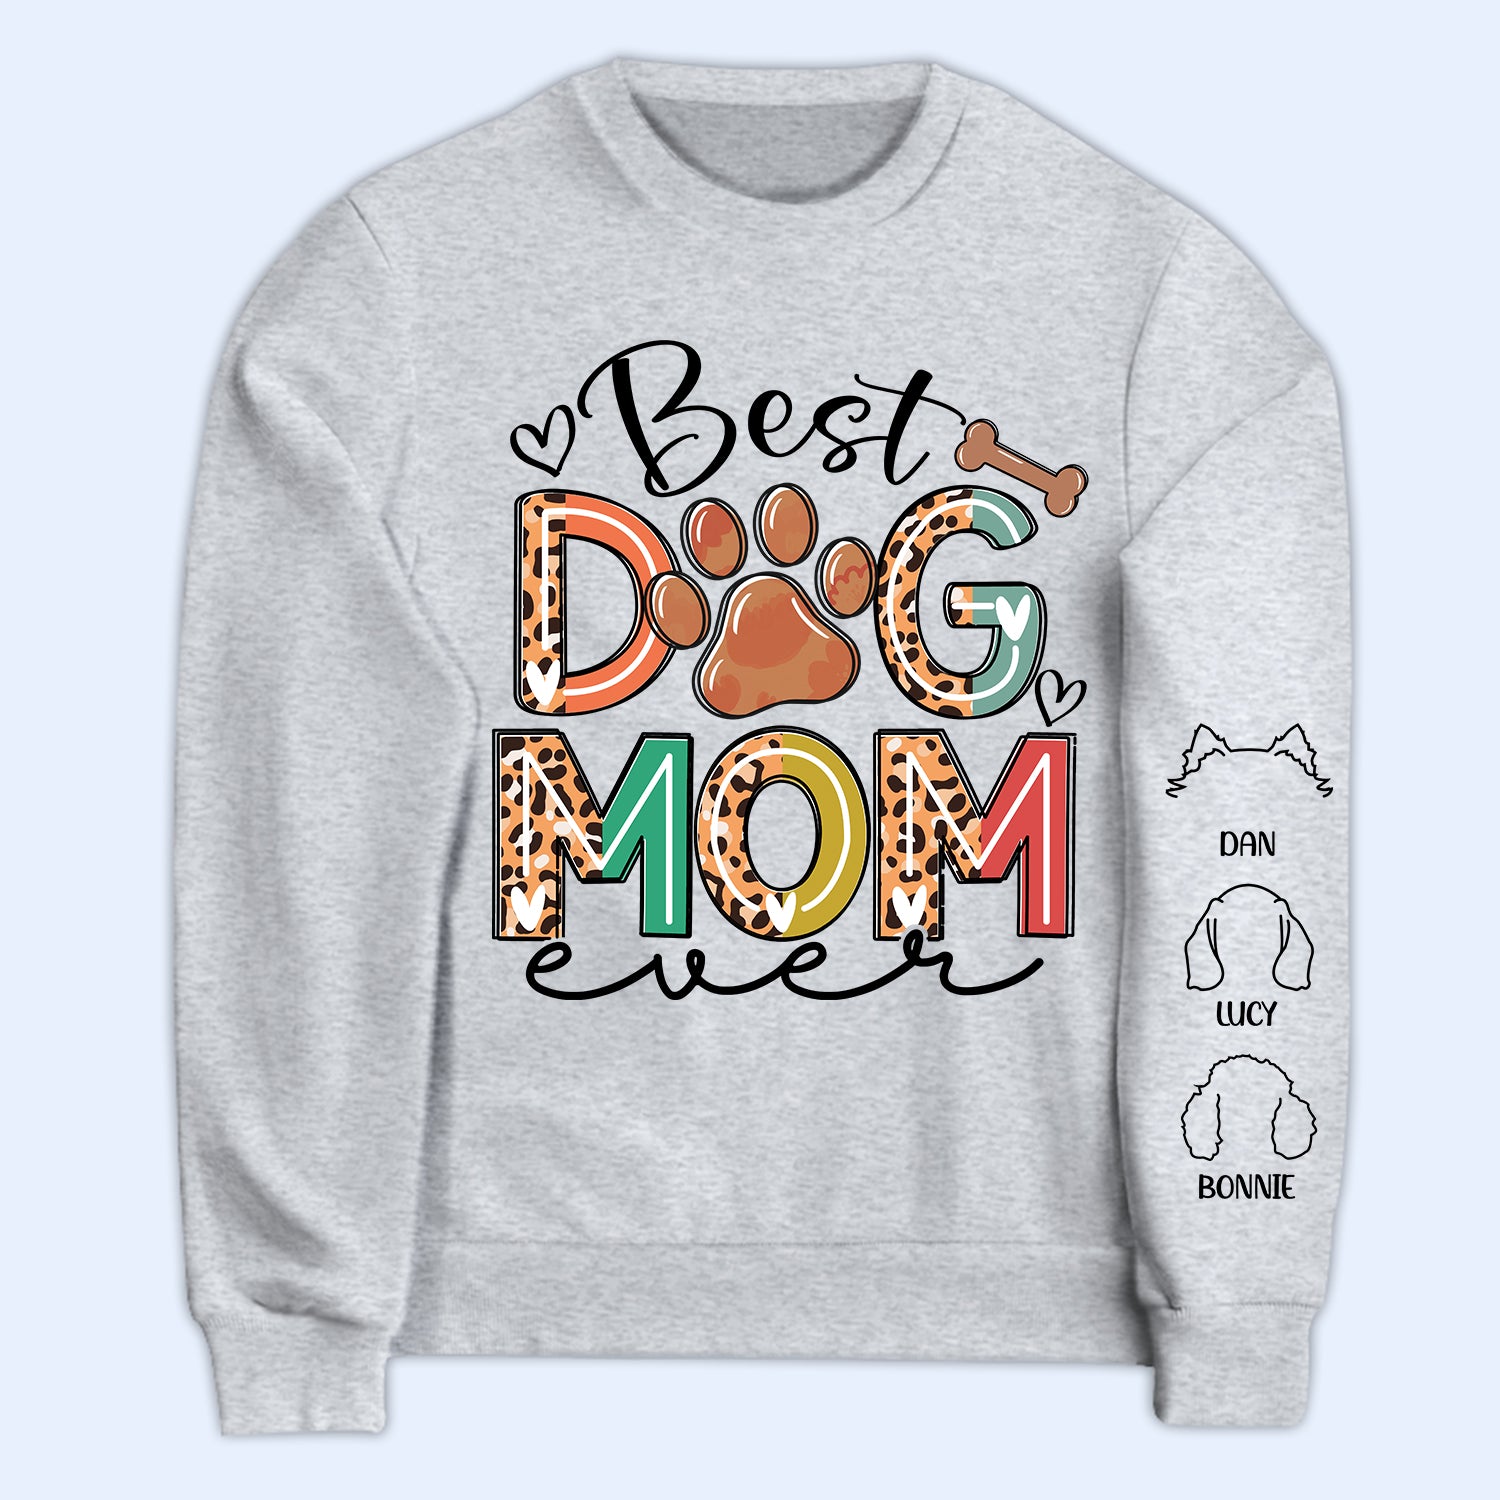 Best Dog Mom - Gift For Mothers, Pet Lovers - Personalized Sweatshirt With Sleeve Imprint